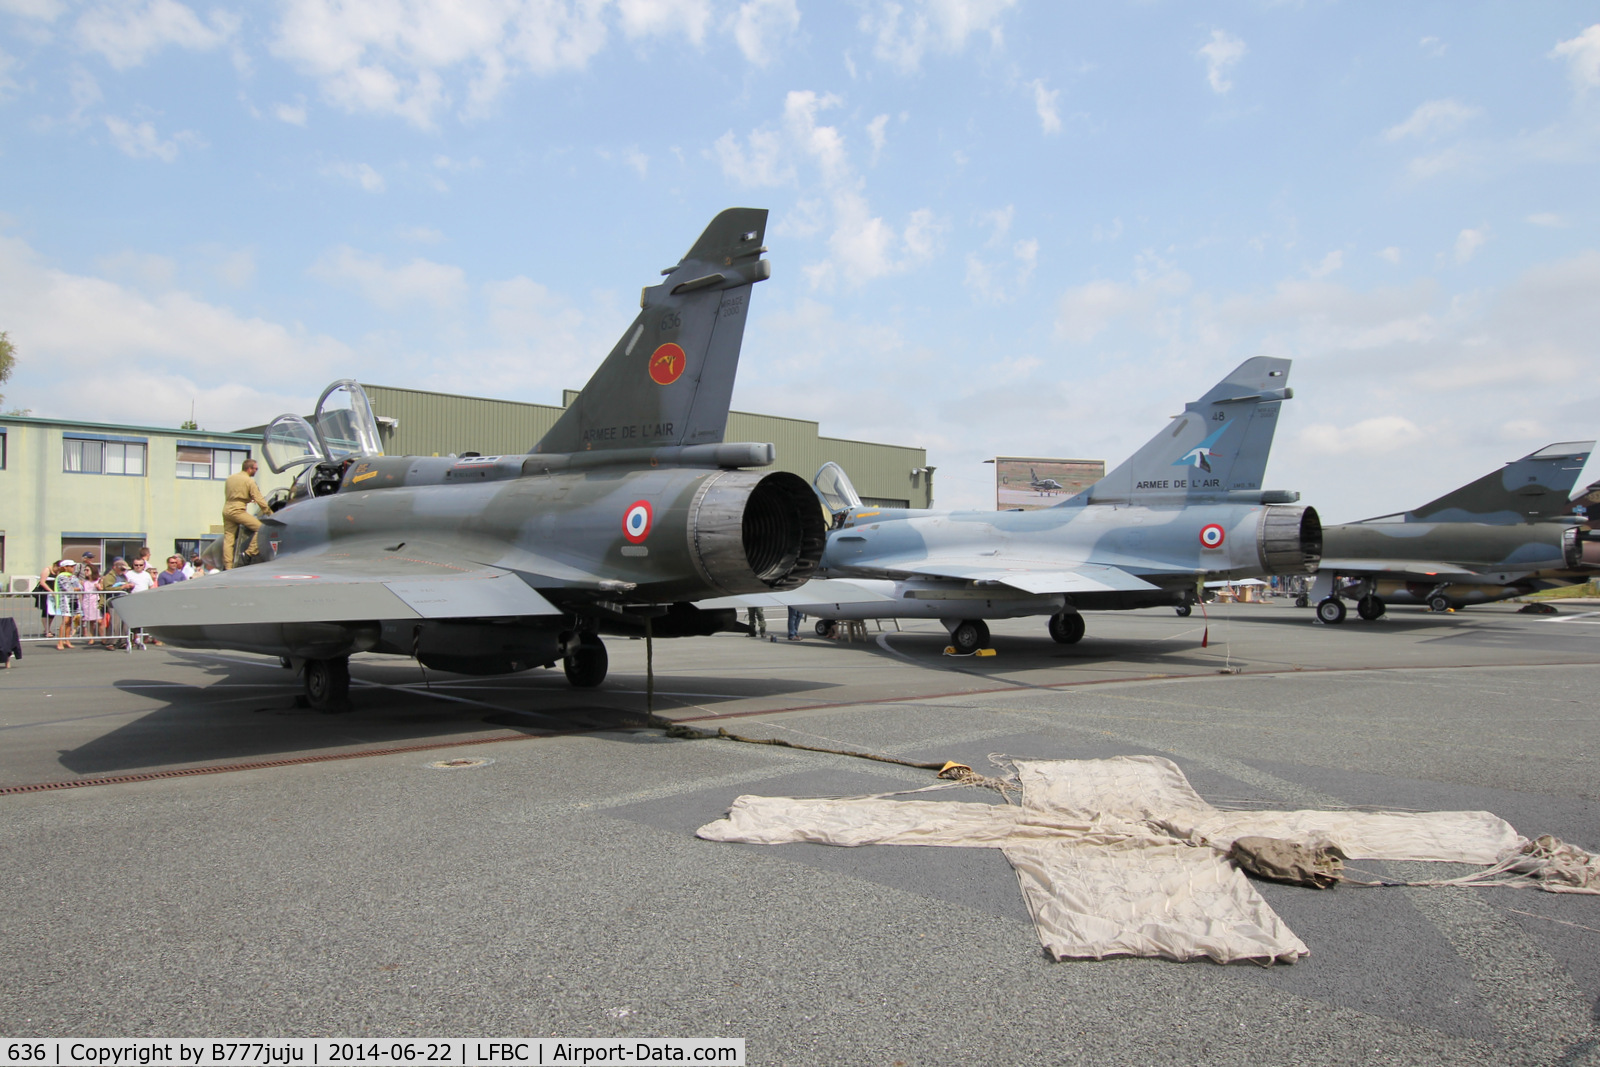 636, Dassault Mirage 2000D C/N 439, on display during Cazaux Open Base 2014, with Drag chute deployed